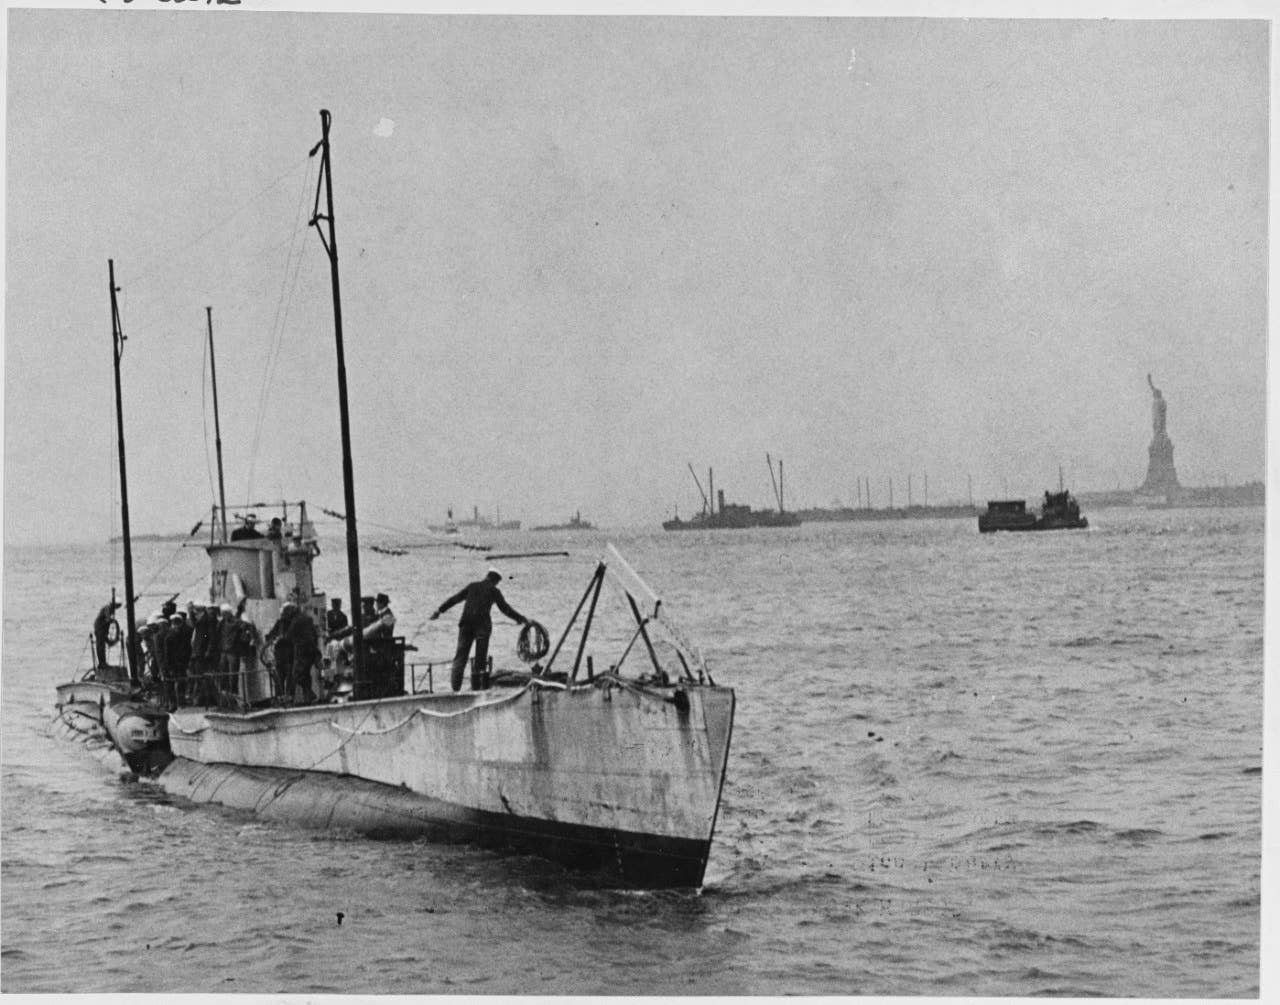 UC-97 sails into New York Harbor in April 1919.